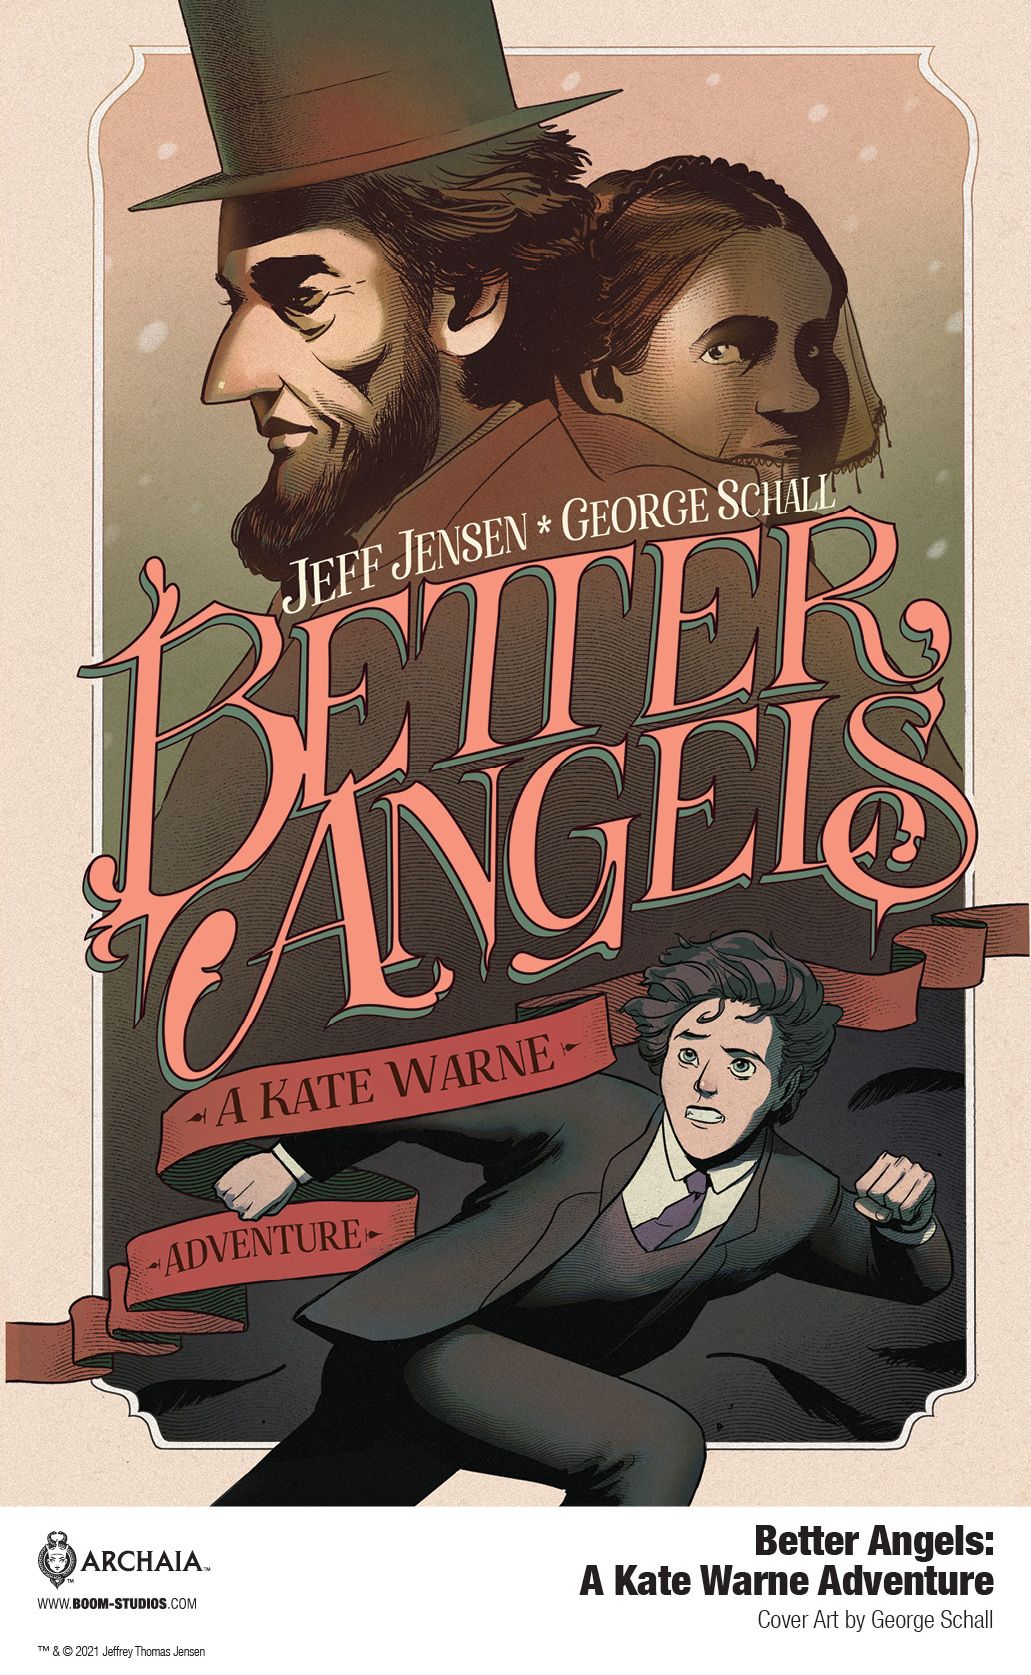 Americas First Female Detective Stars In New Better Angels Series